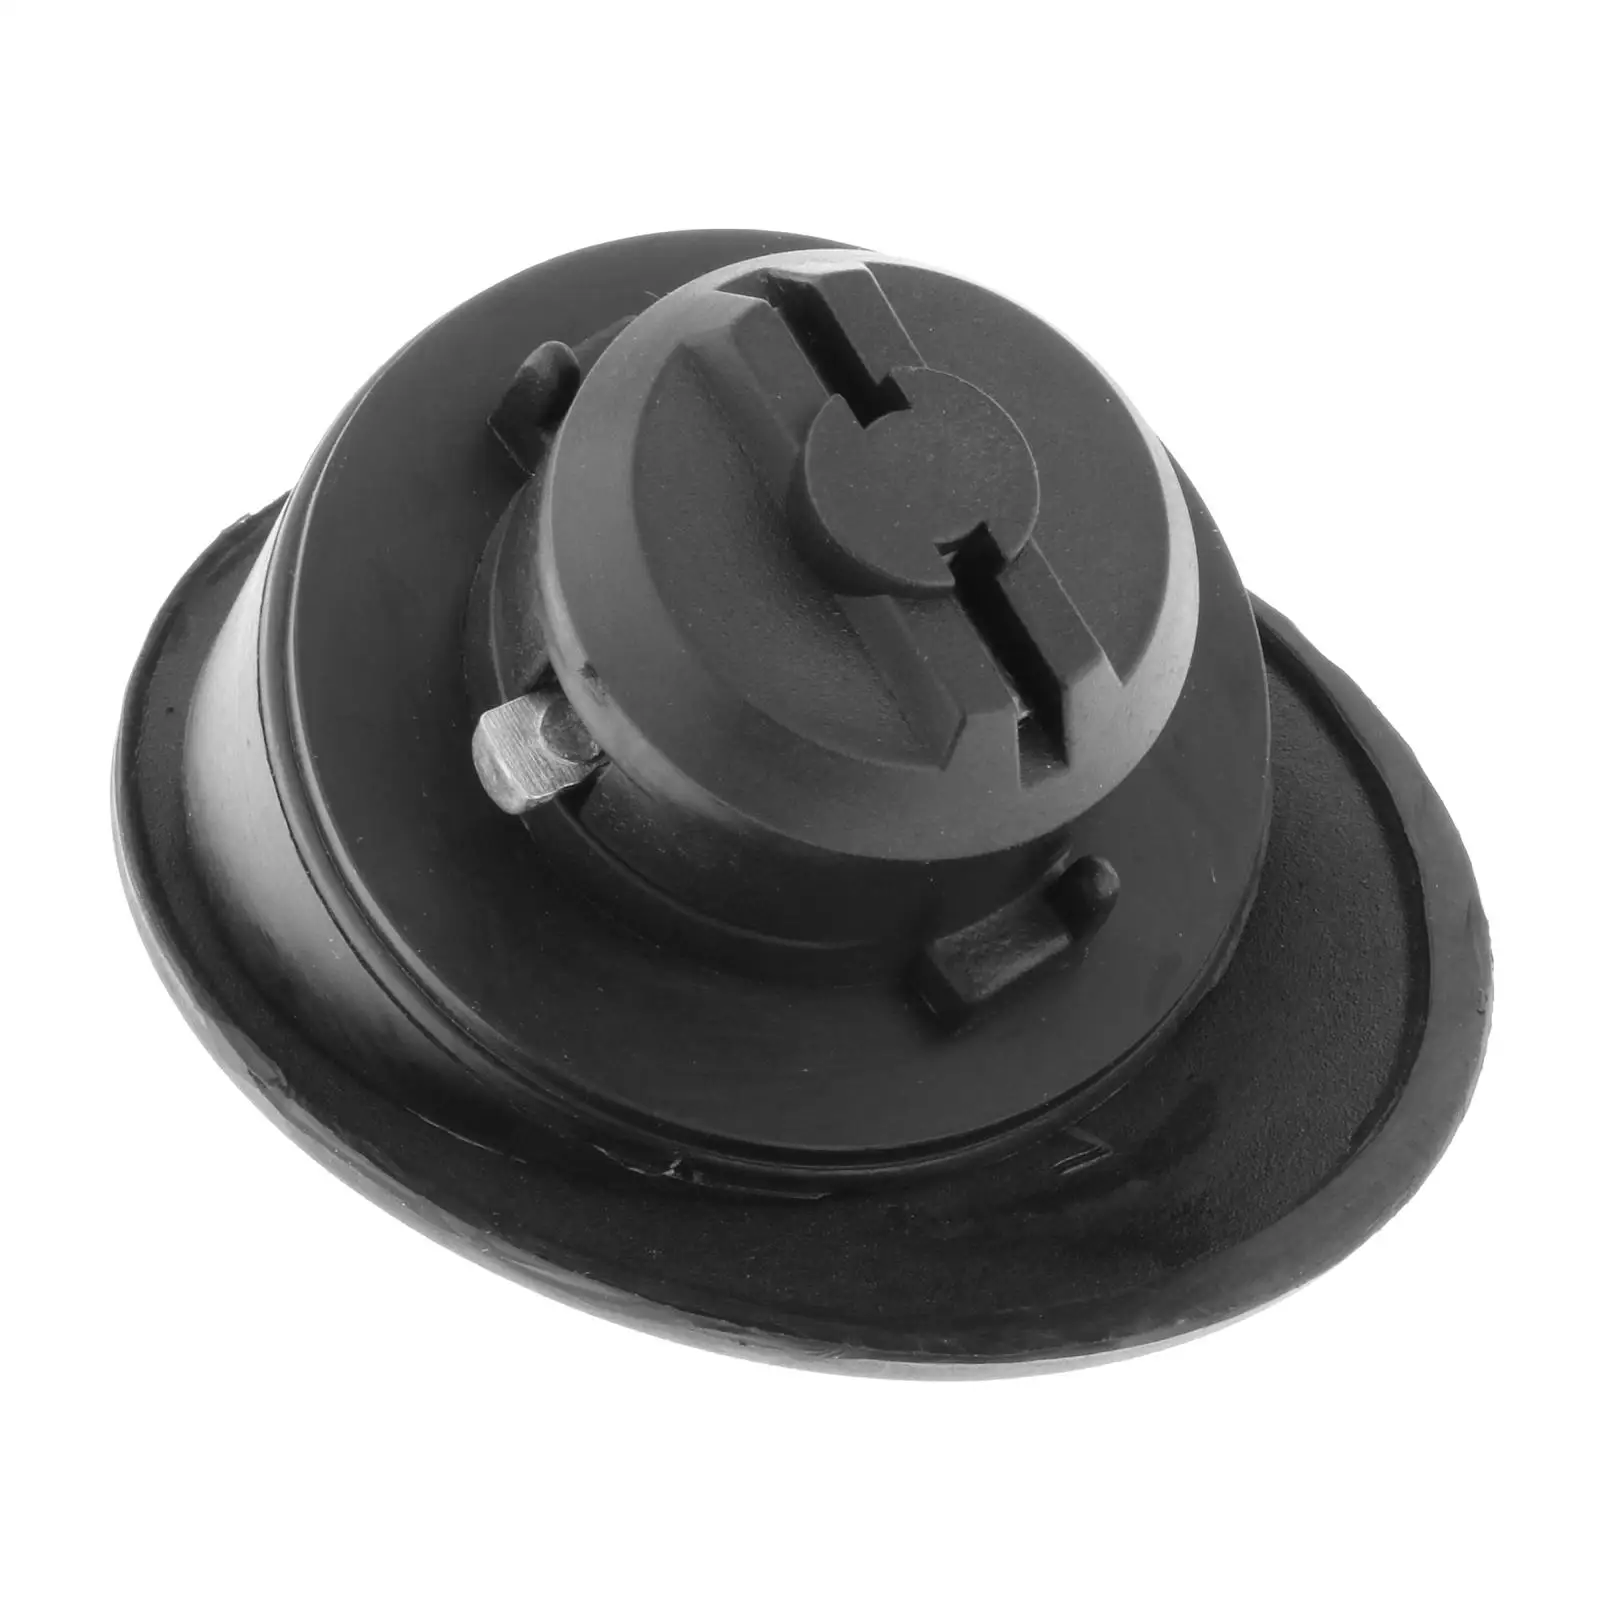 Fuel Tank Cover Caps with Two Keys for Ford Transit 1994-2000 3966745 Black